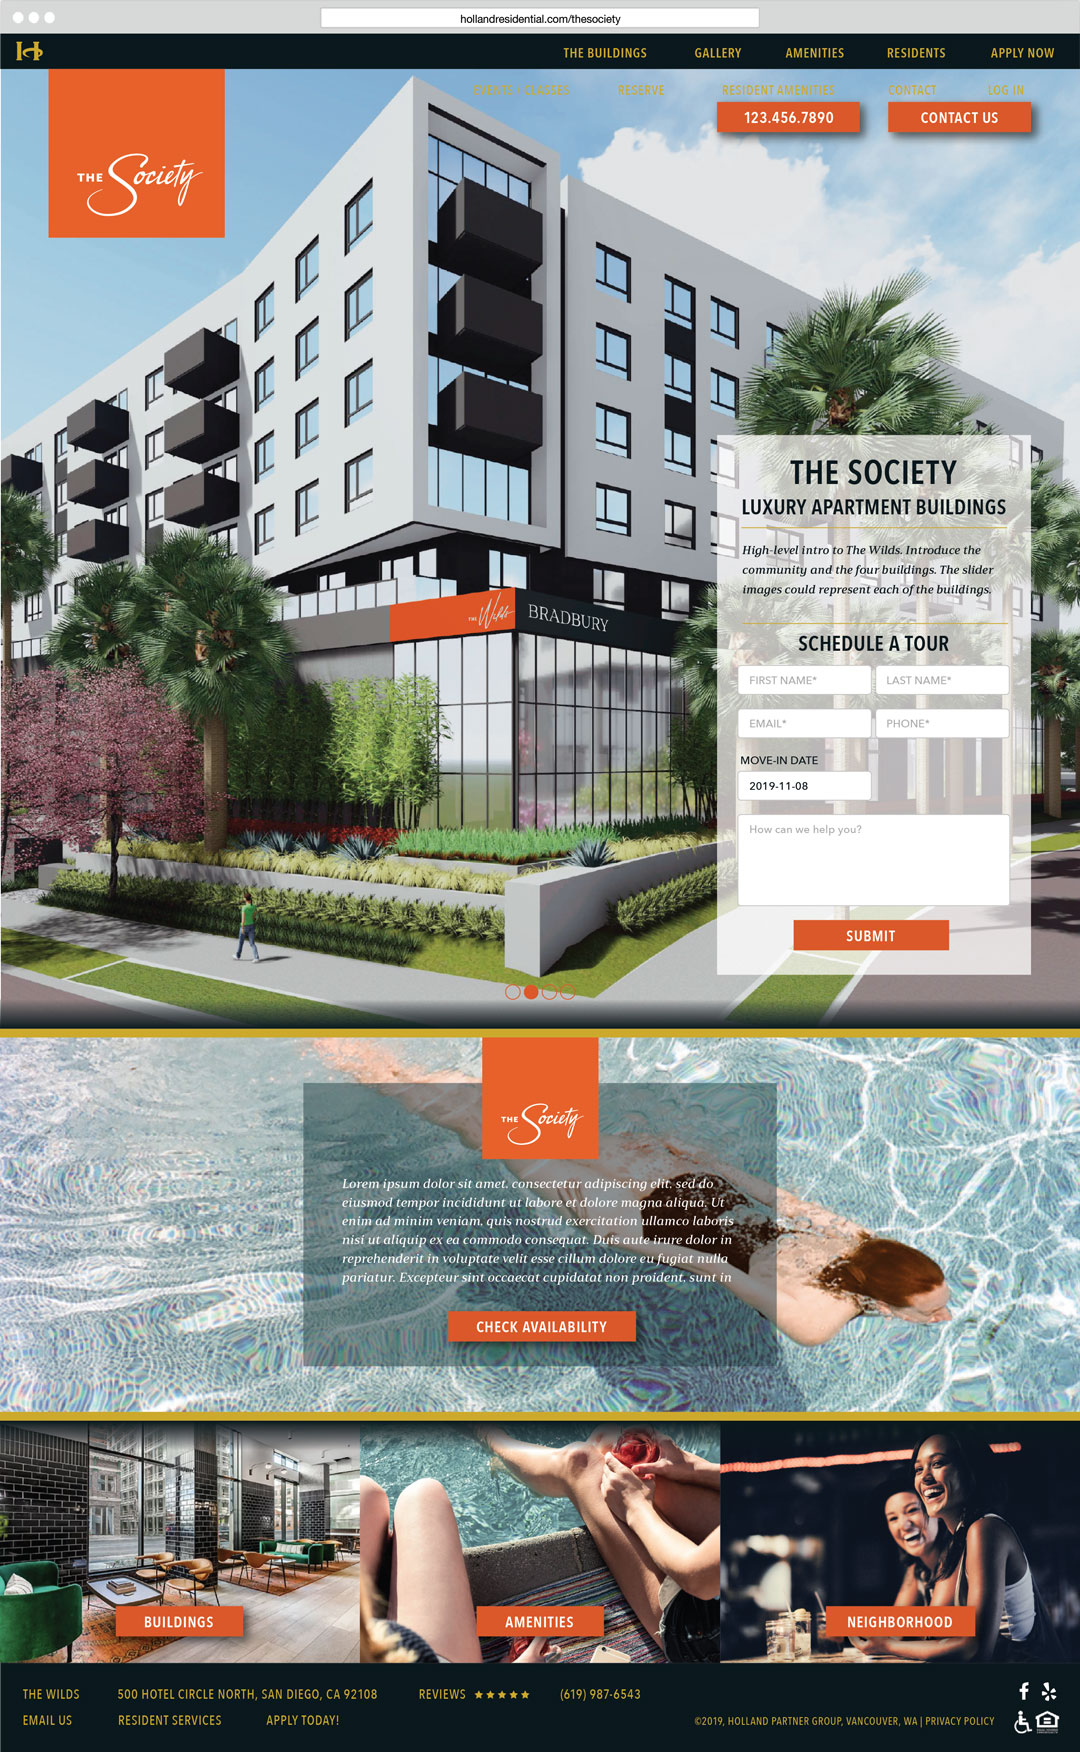 Mockup of The Society Luxury Apartments Holland Residential webpage created by Incubate Design